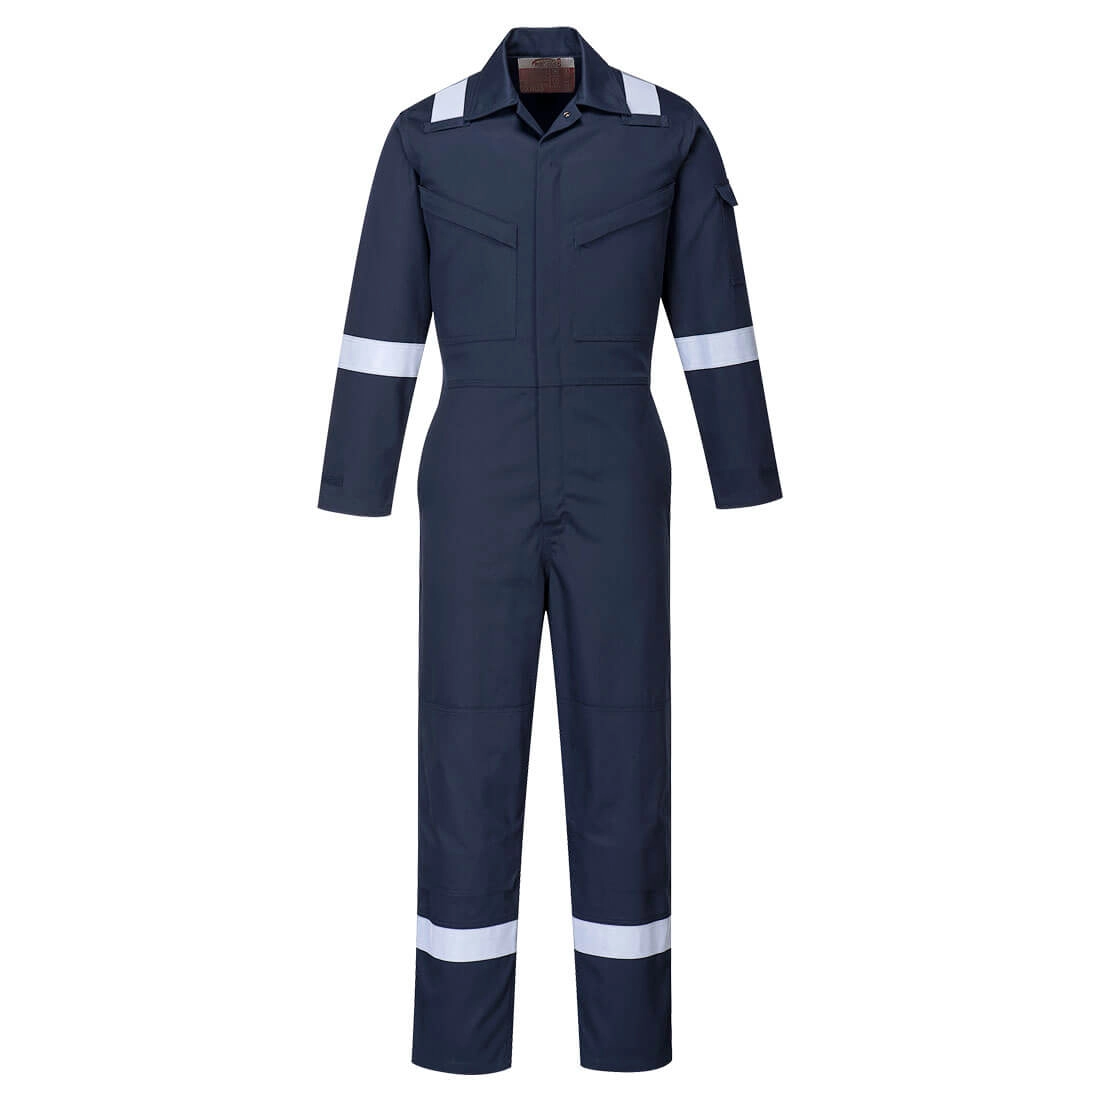 Bizflame Work Women's Coverall 350g